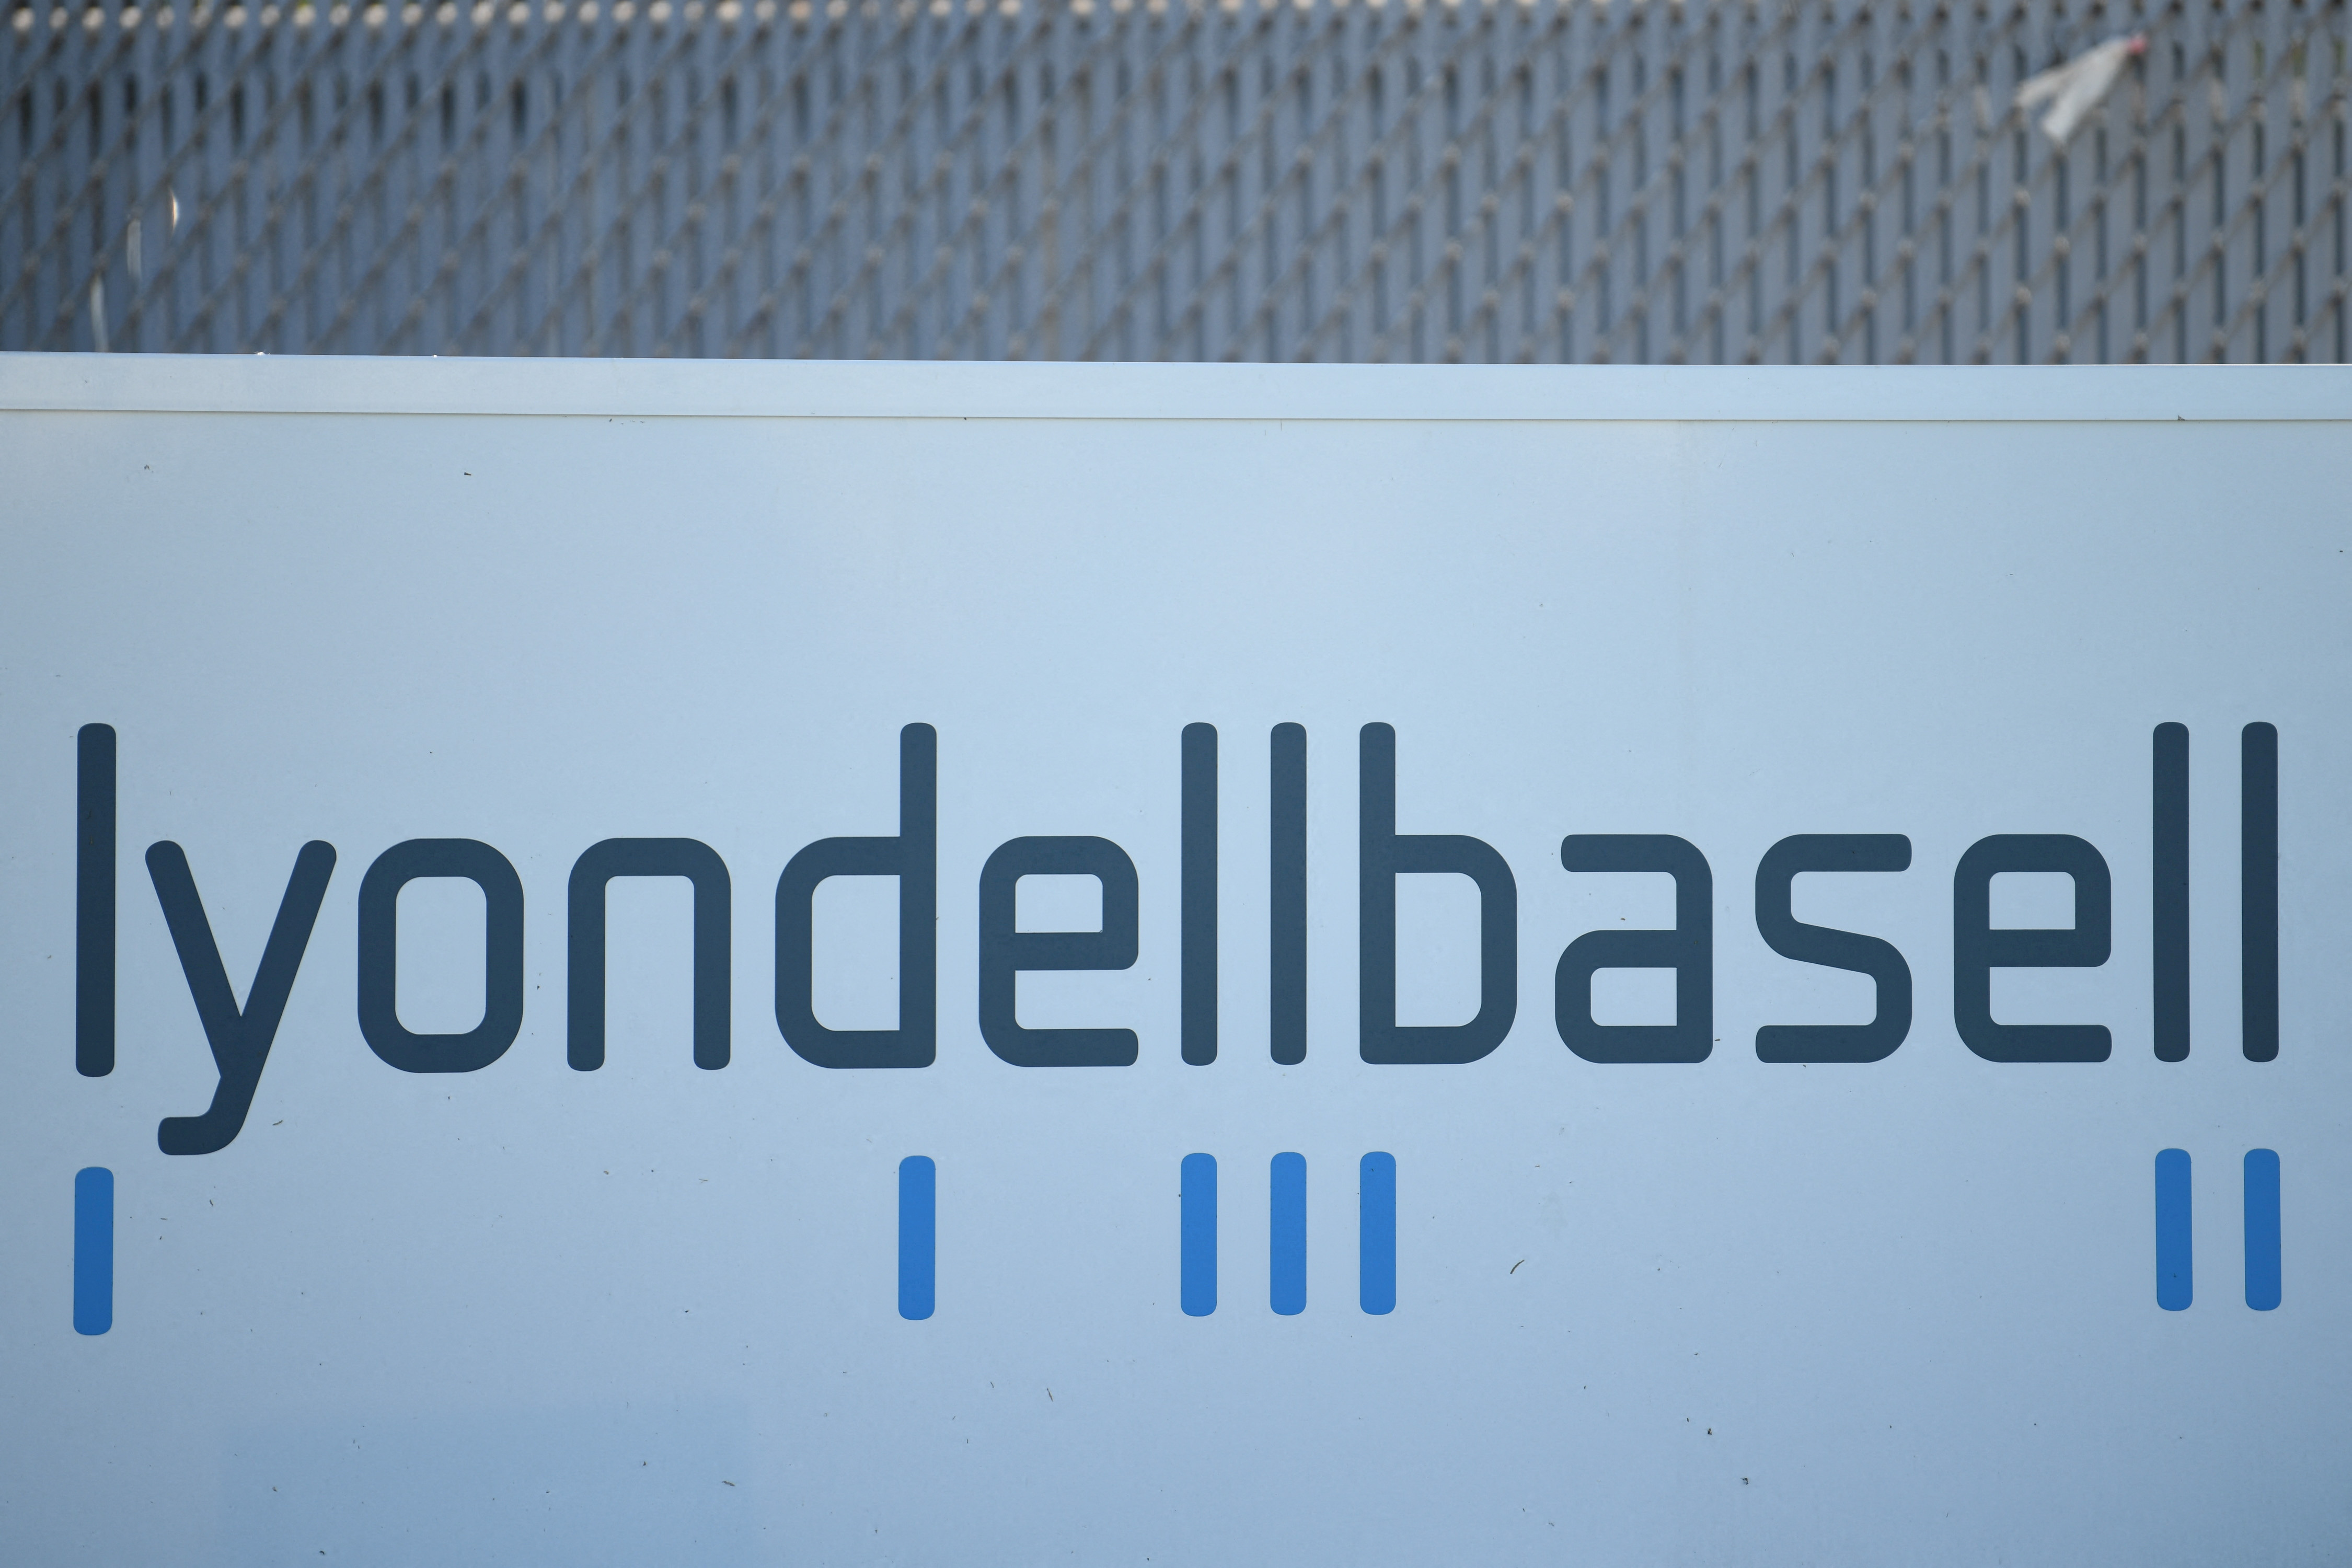 An entrance sign at the LyondellBasell refinery, located near the Houston Ship Channel, is seen in Houston